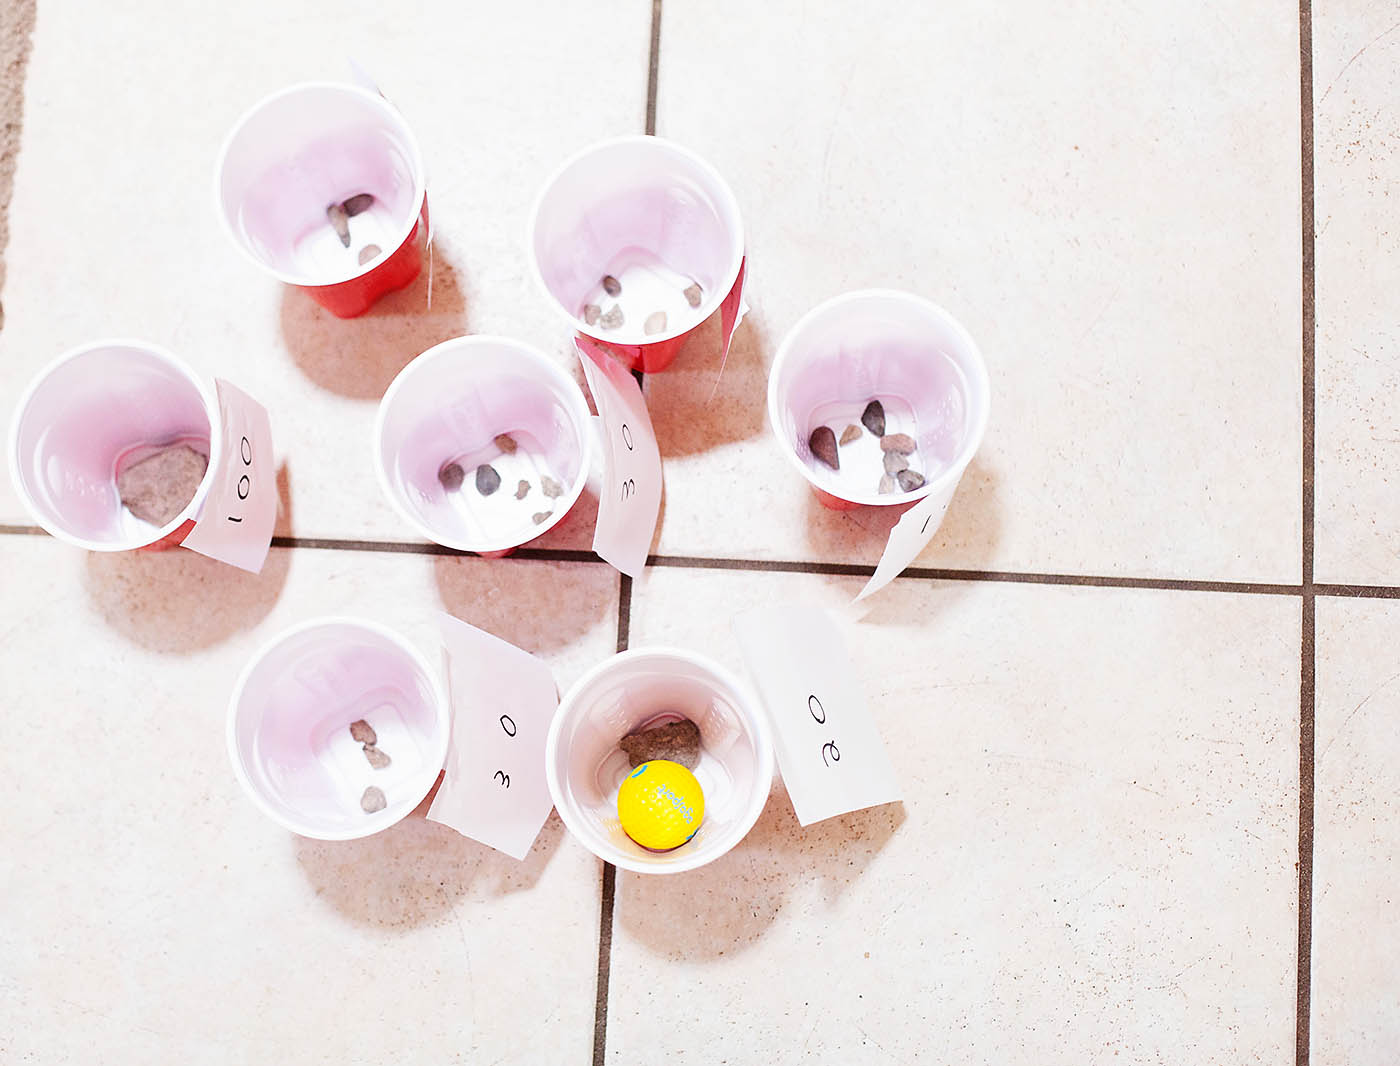 Make your own game using plastic cups - from All for the Boys